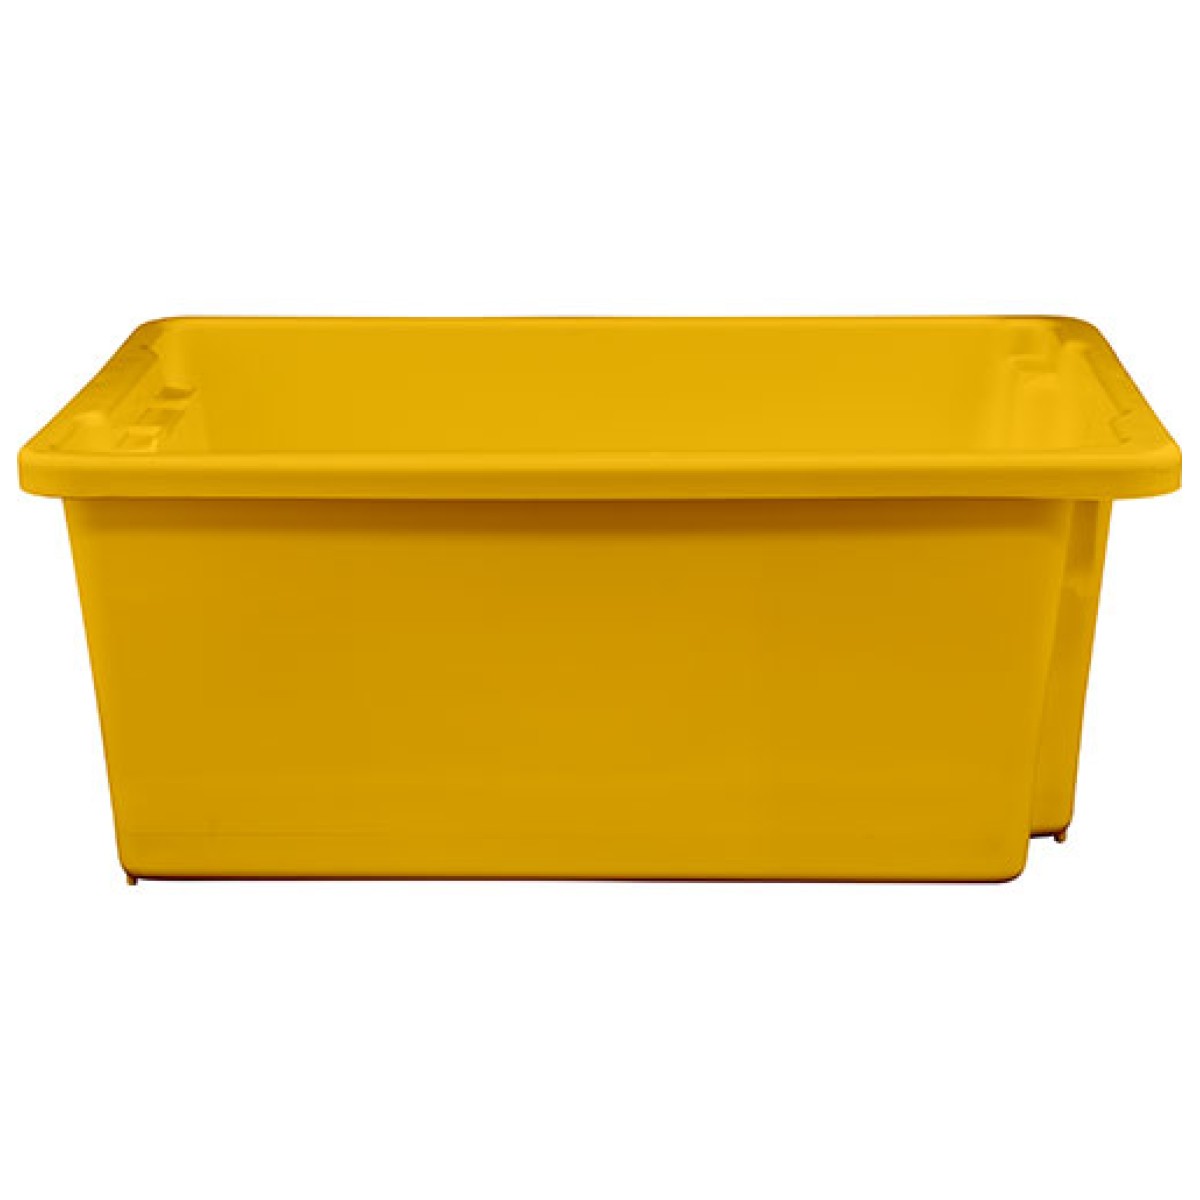 TRAY STACKANDNEST 52ltr YELLOW (LRG) No.10